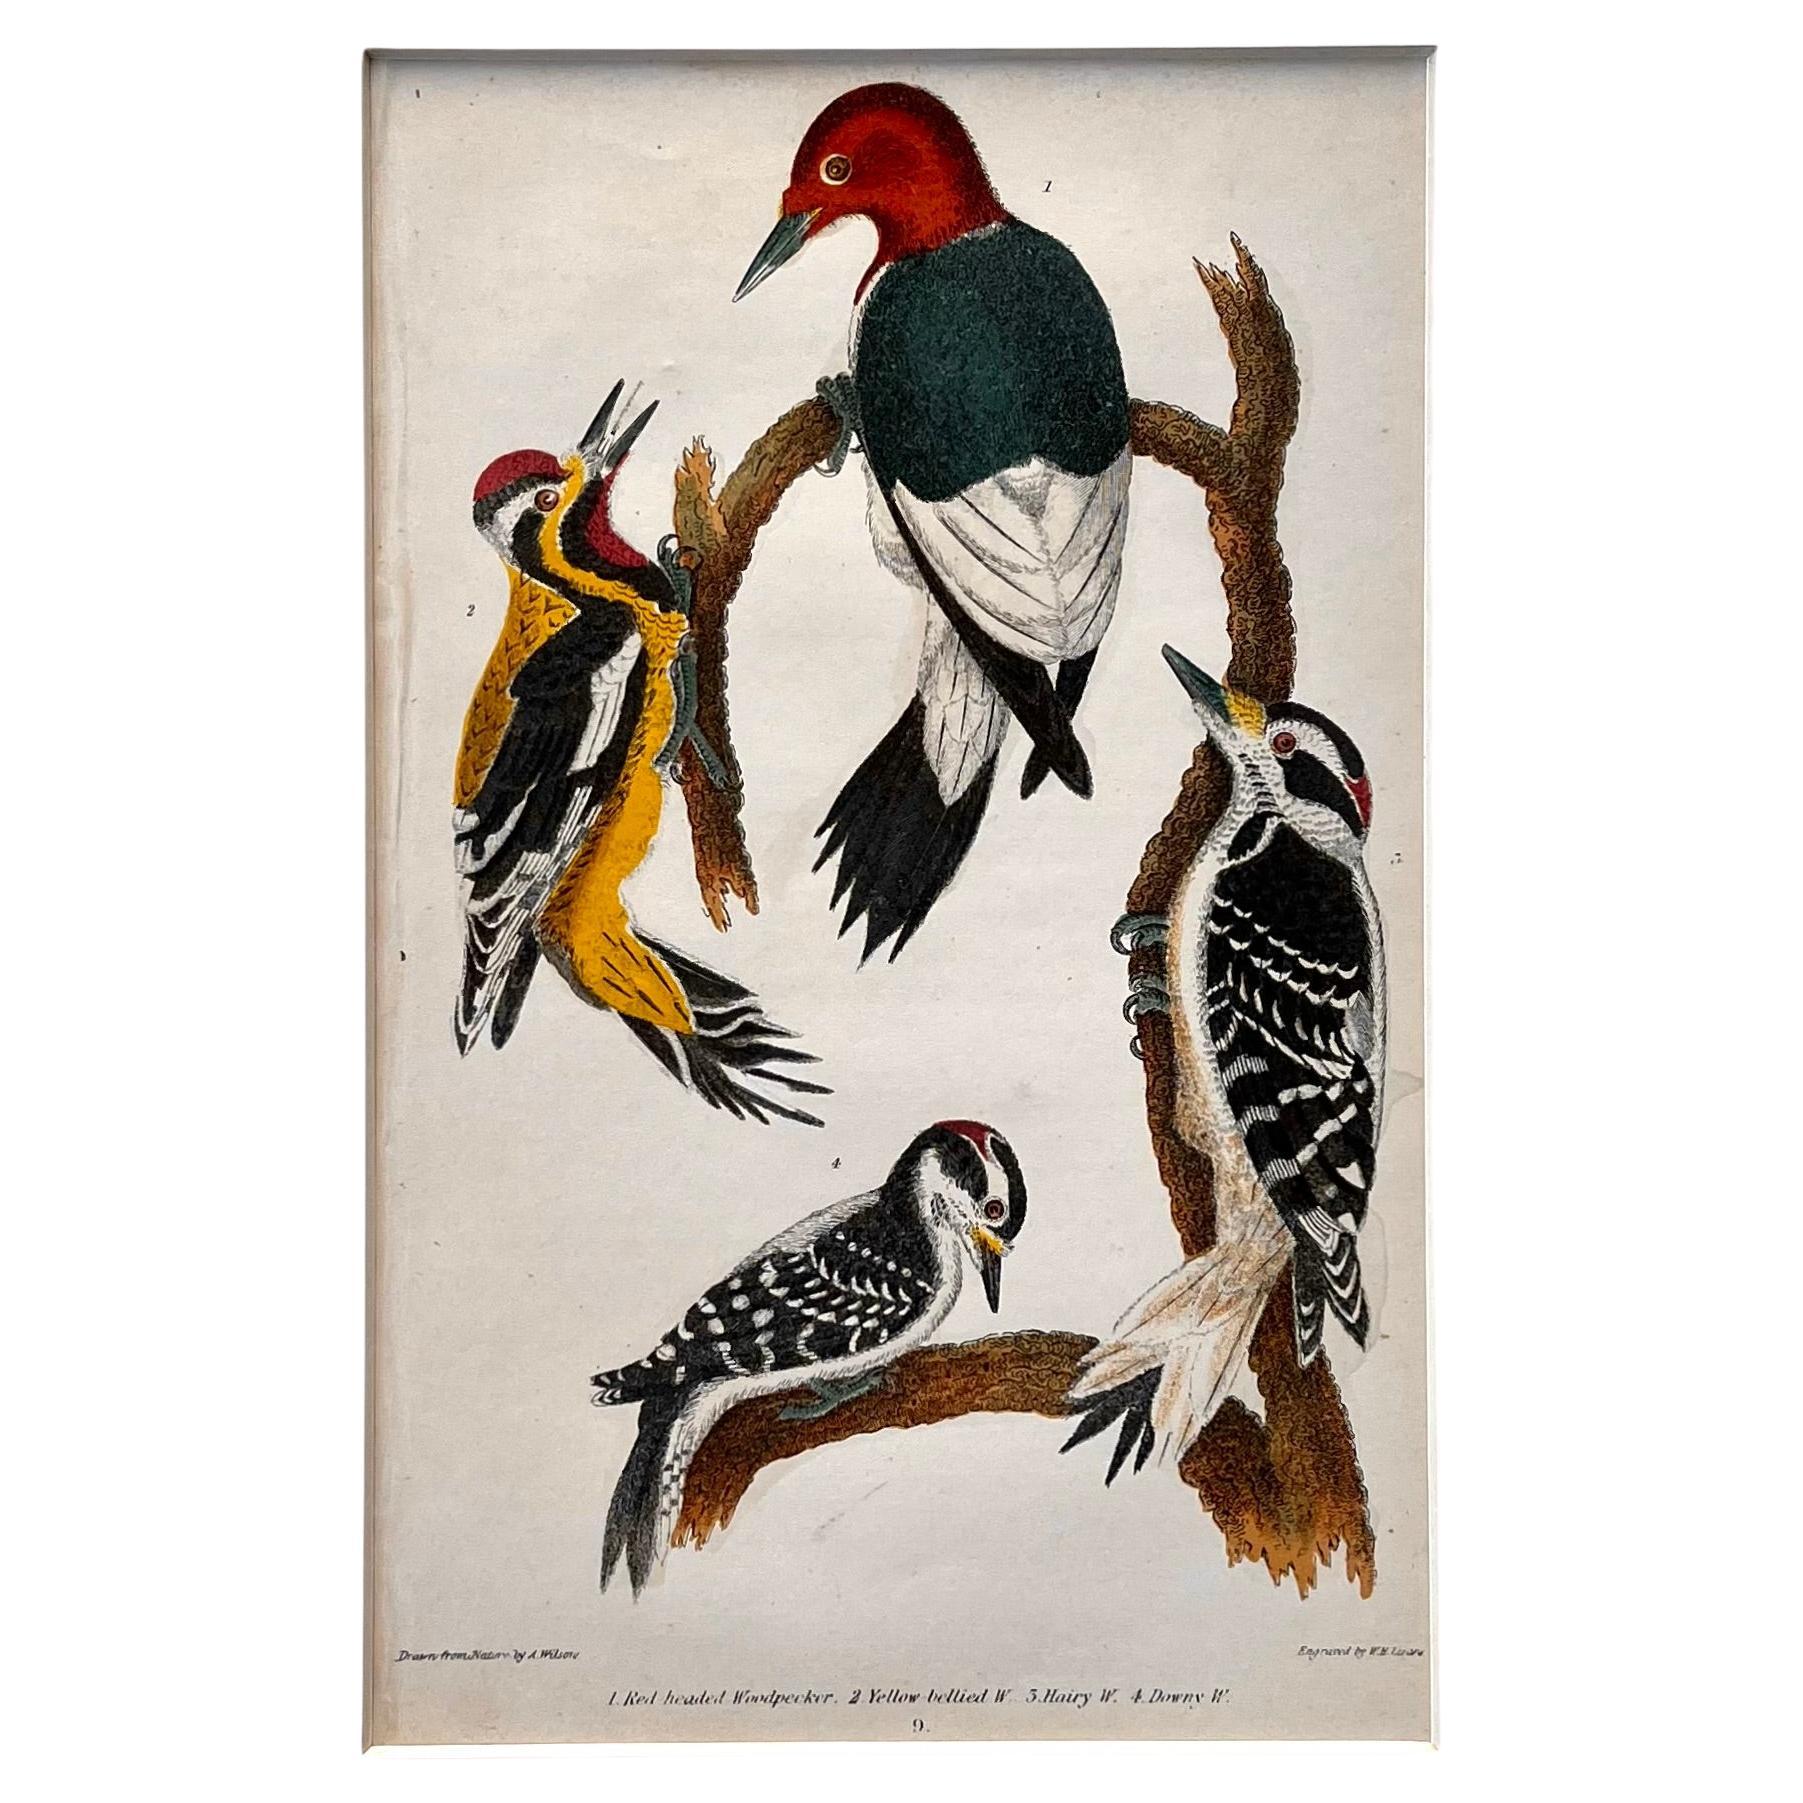 19th Century Print by Alexander Wilson of American Ornithology - Woodpeckers